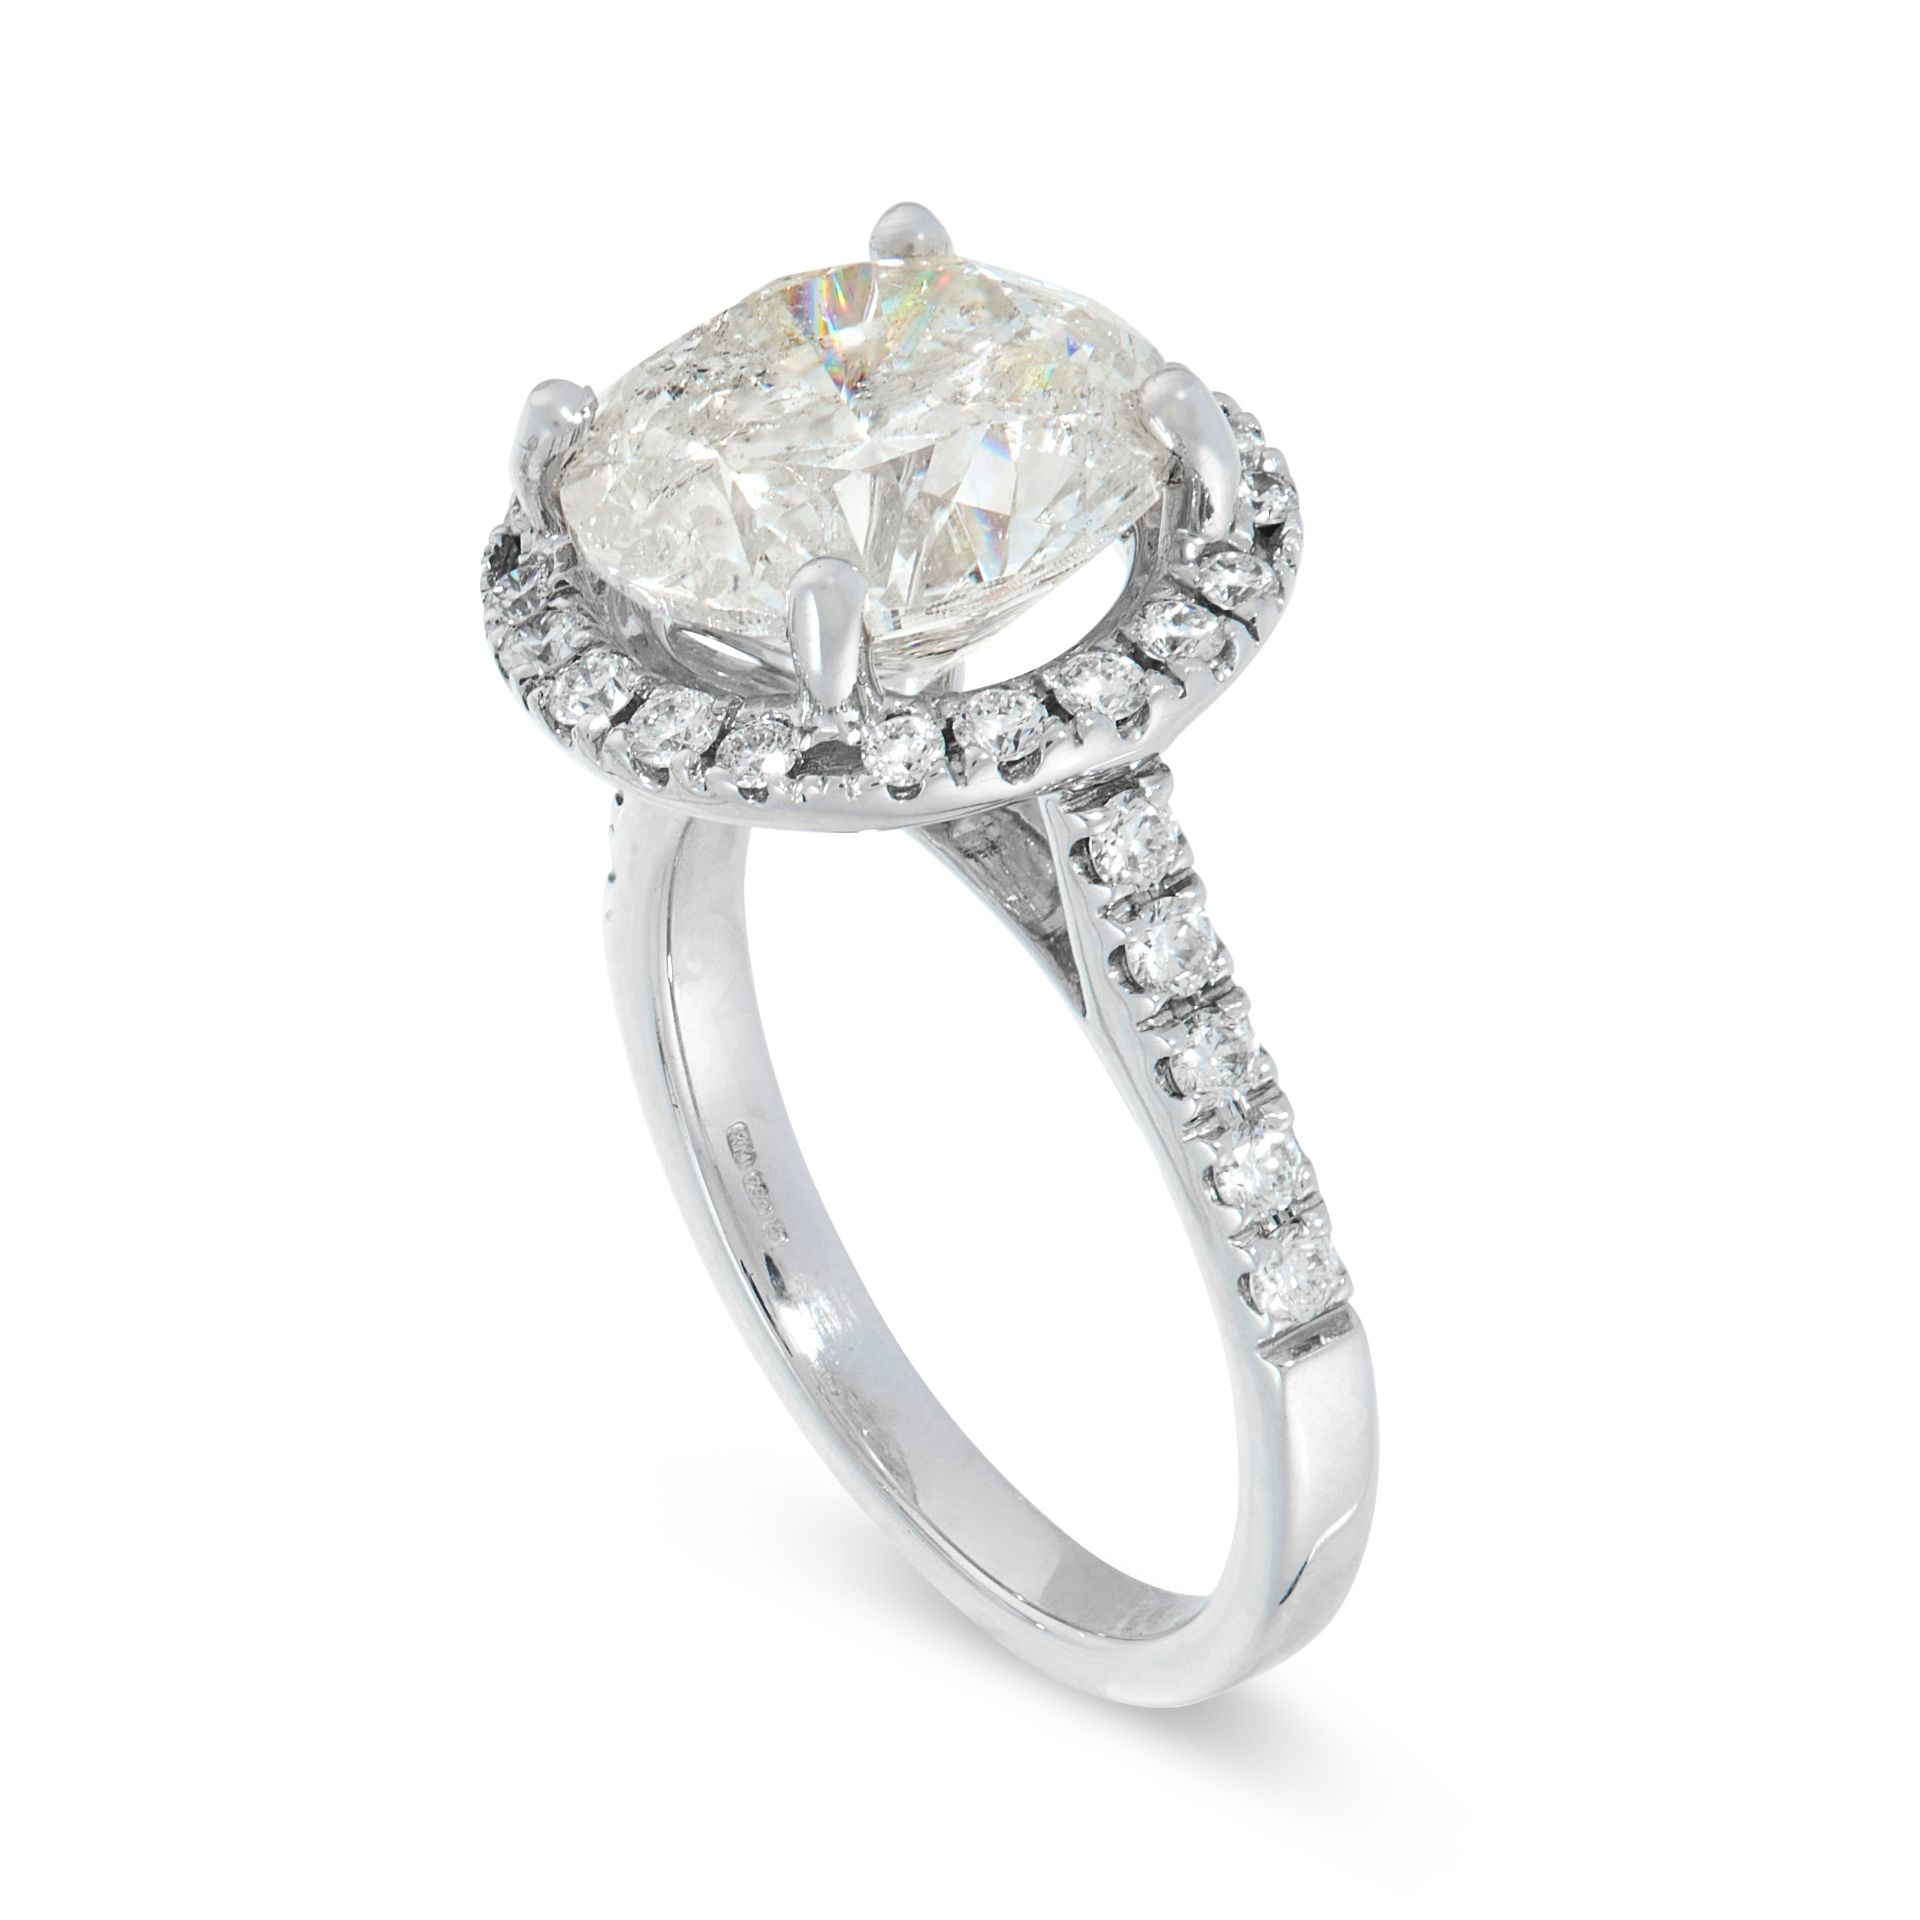 A SOLITAIRE DIAMOND ENGAGEMENT RING in platinum, set with a round cut diamond of 5.30 carats, within - Image 2 of 2